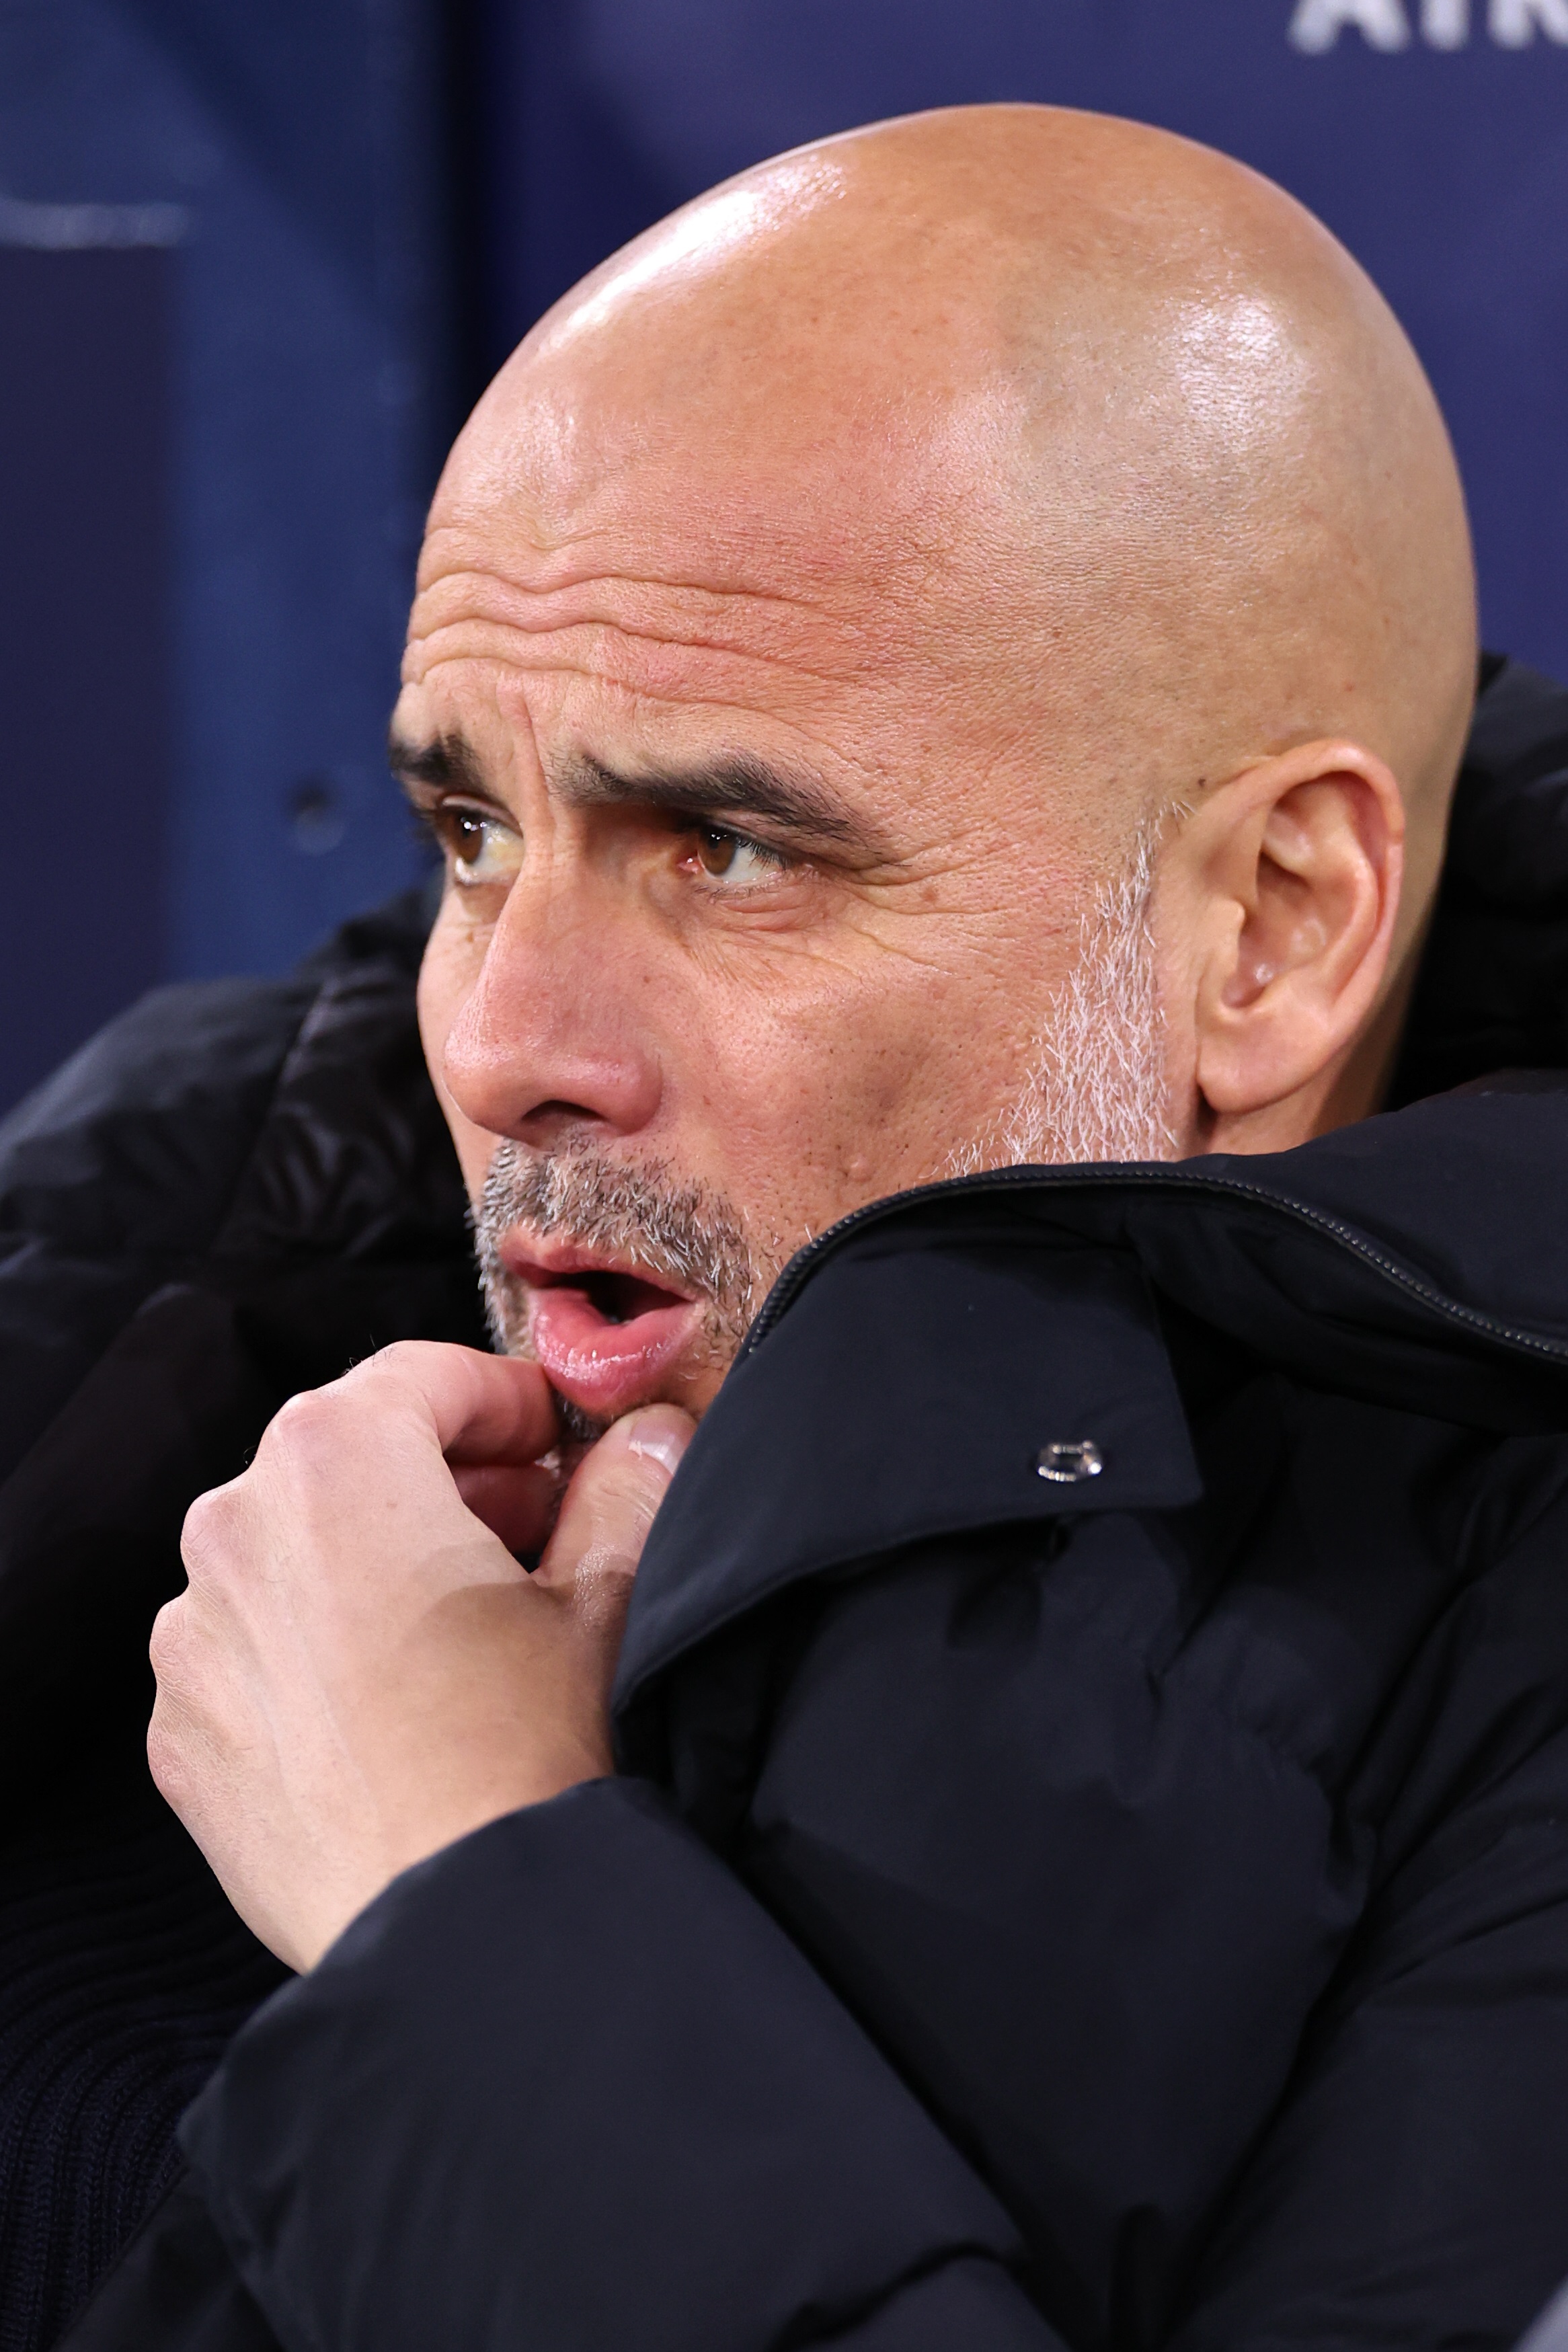 The Impending End To Guardiola’s Reign